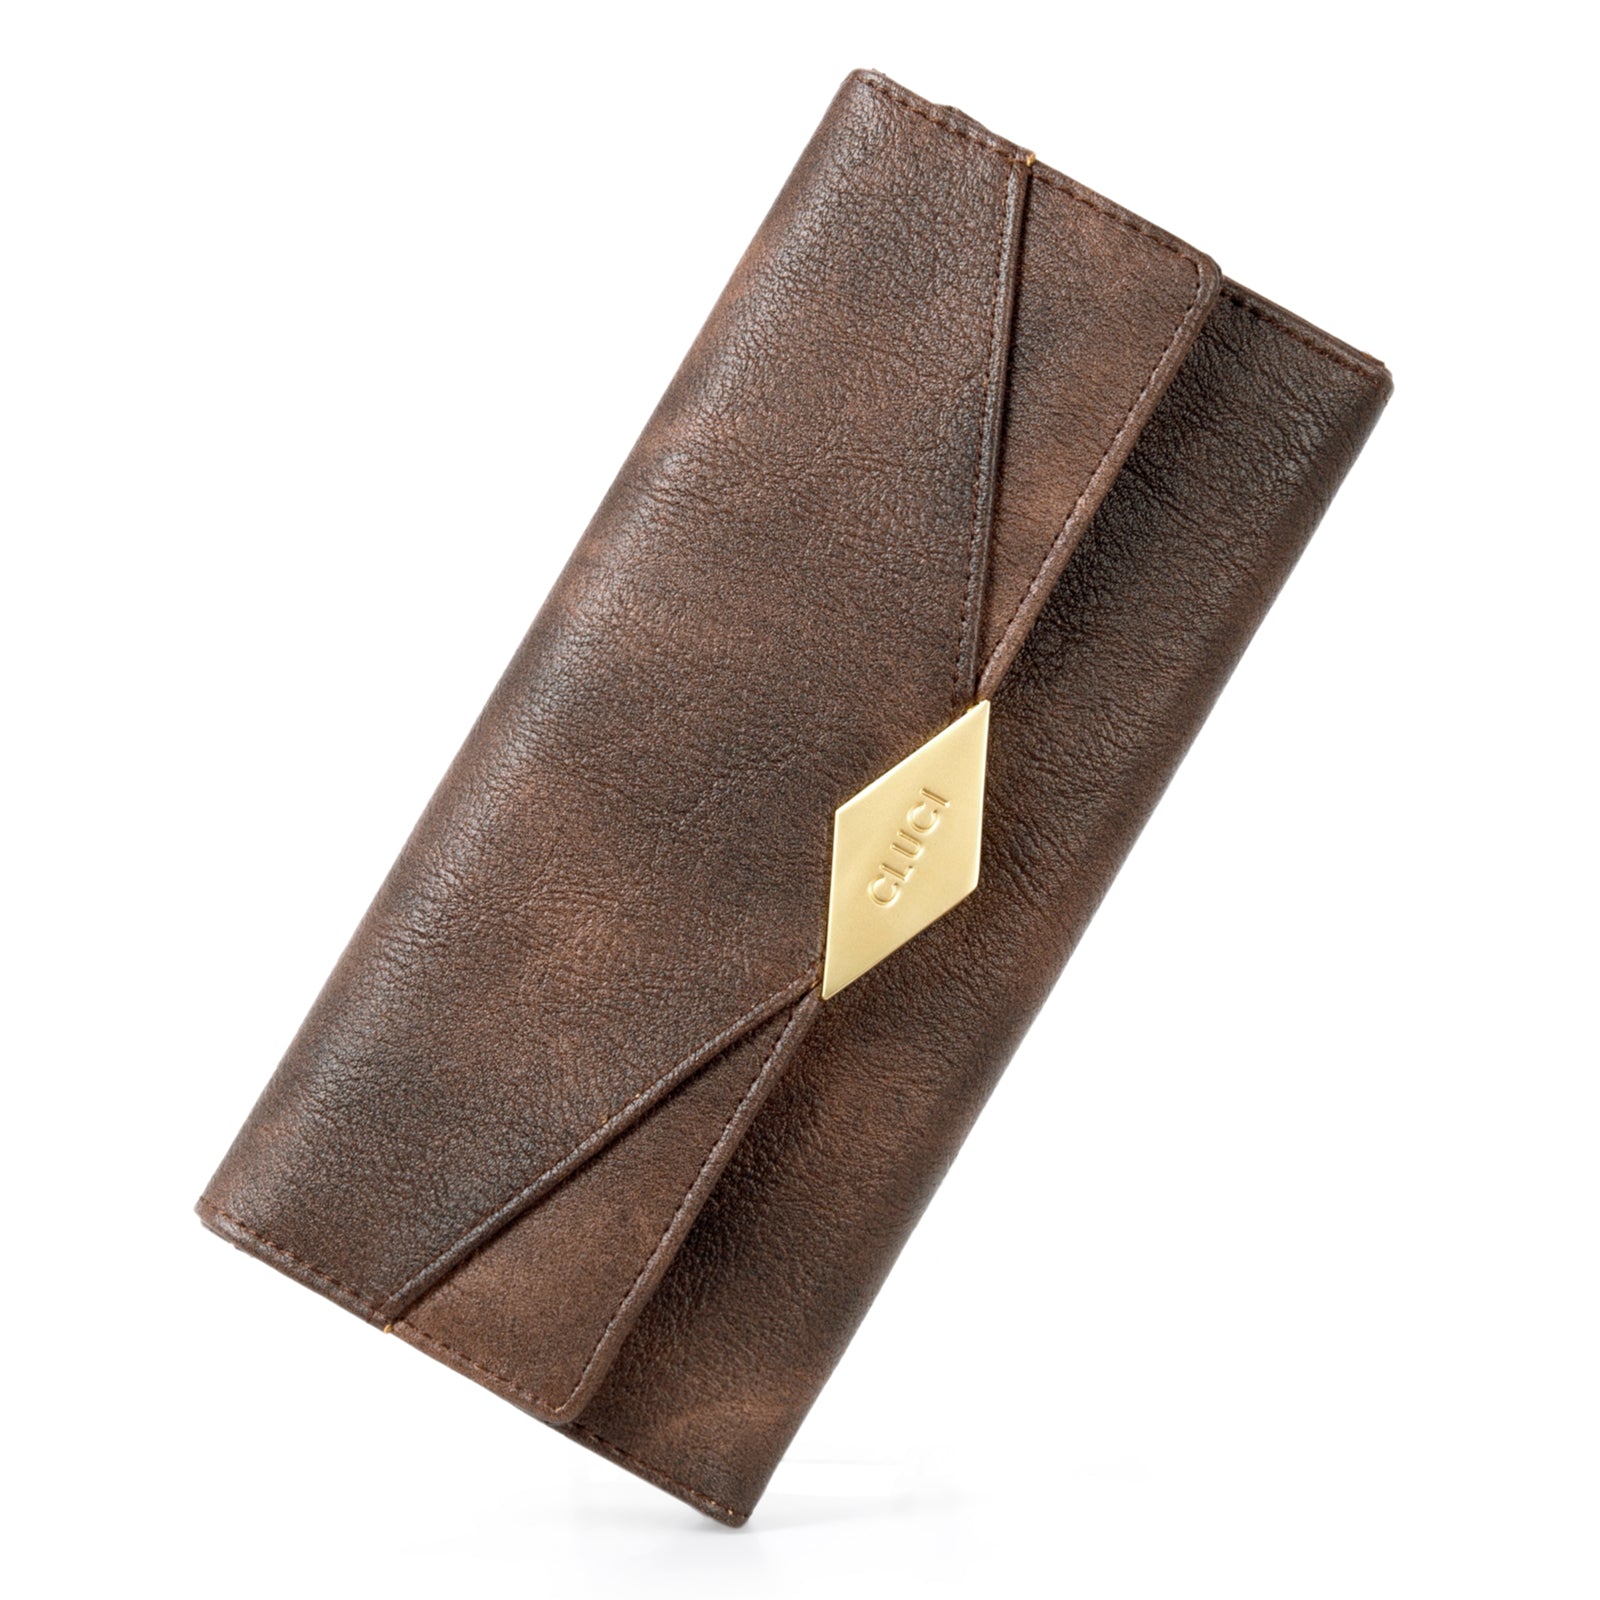 Mile Large Stylish Wallet For Women With Multiple Card Slots